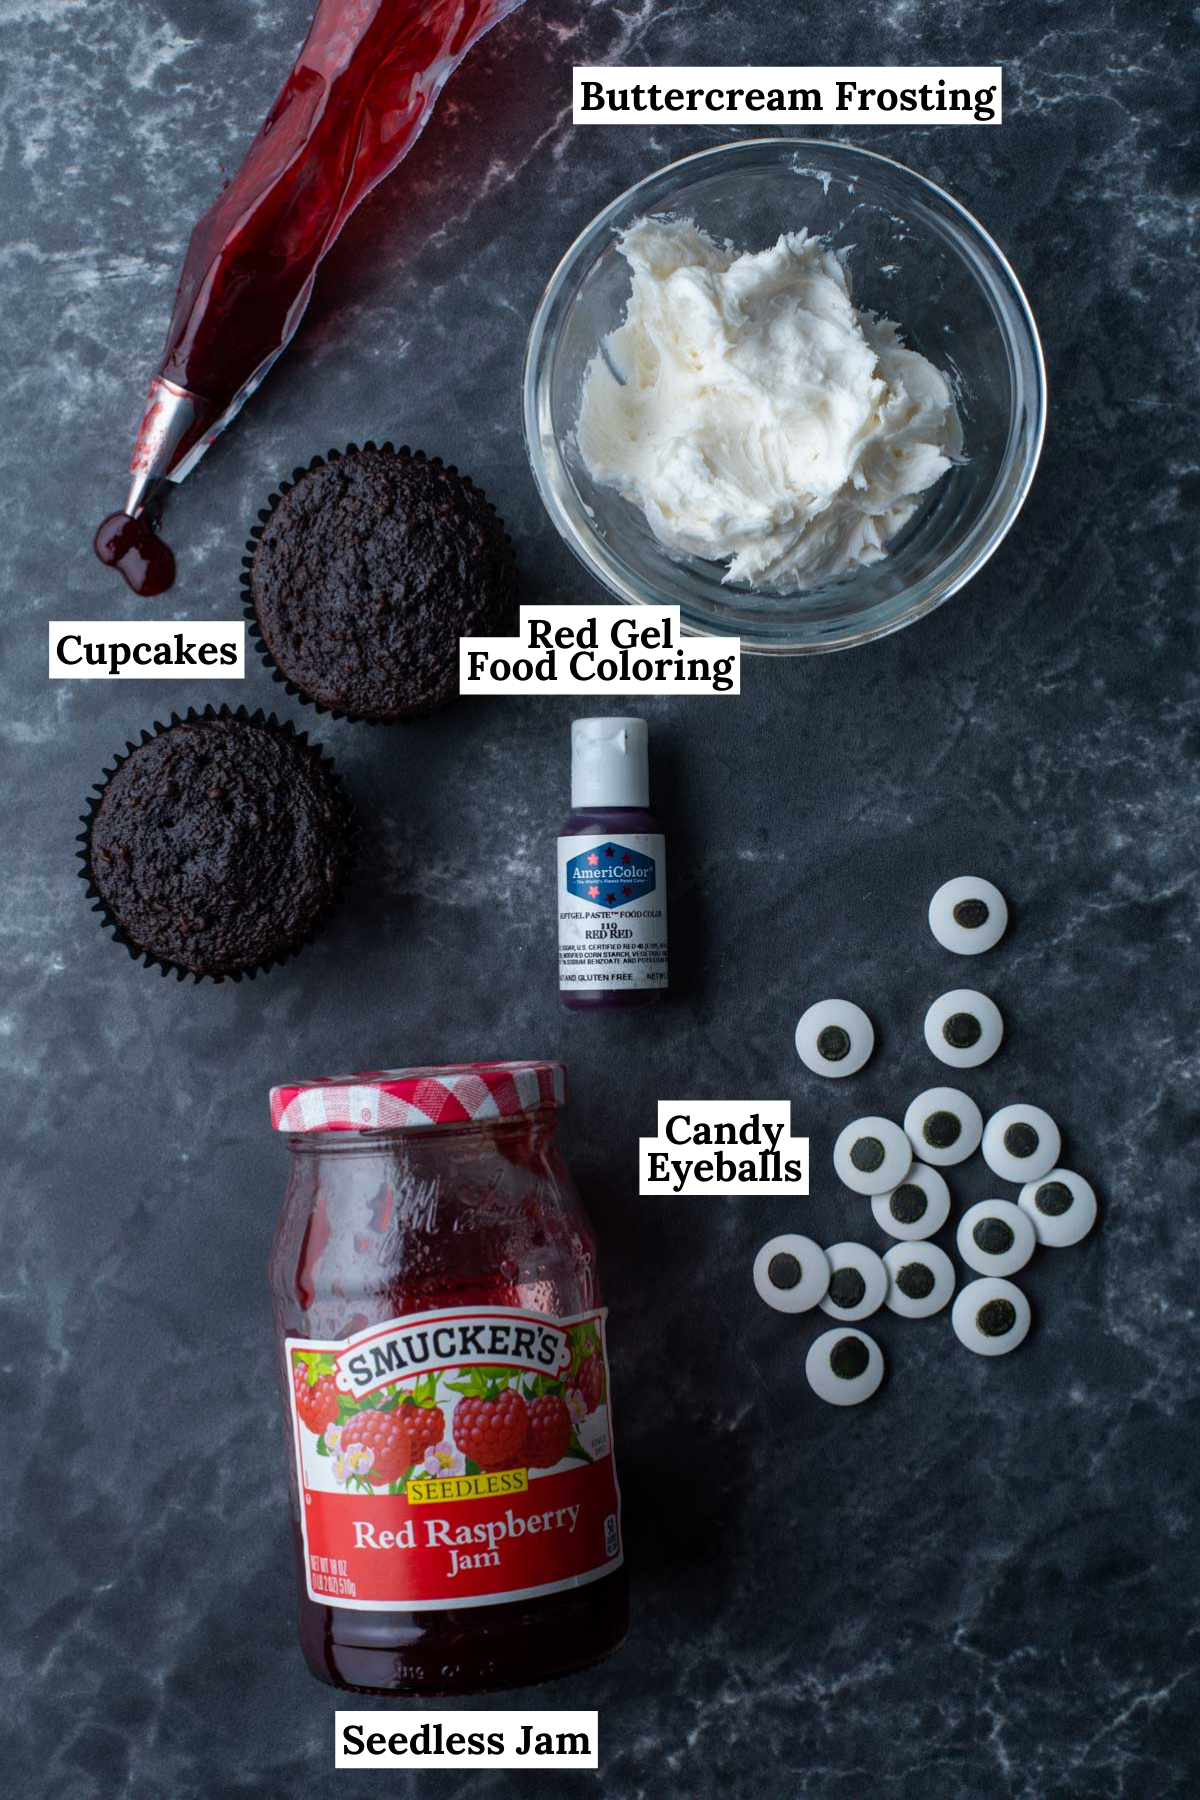 ingredients for eyeball cupcakes including chocolate cupcakes, red gel food coloring, candy eyebals, white frosting and jam